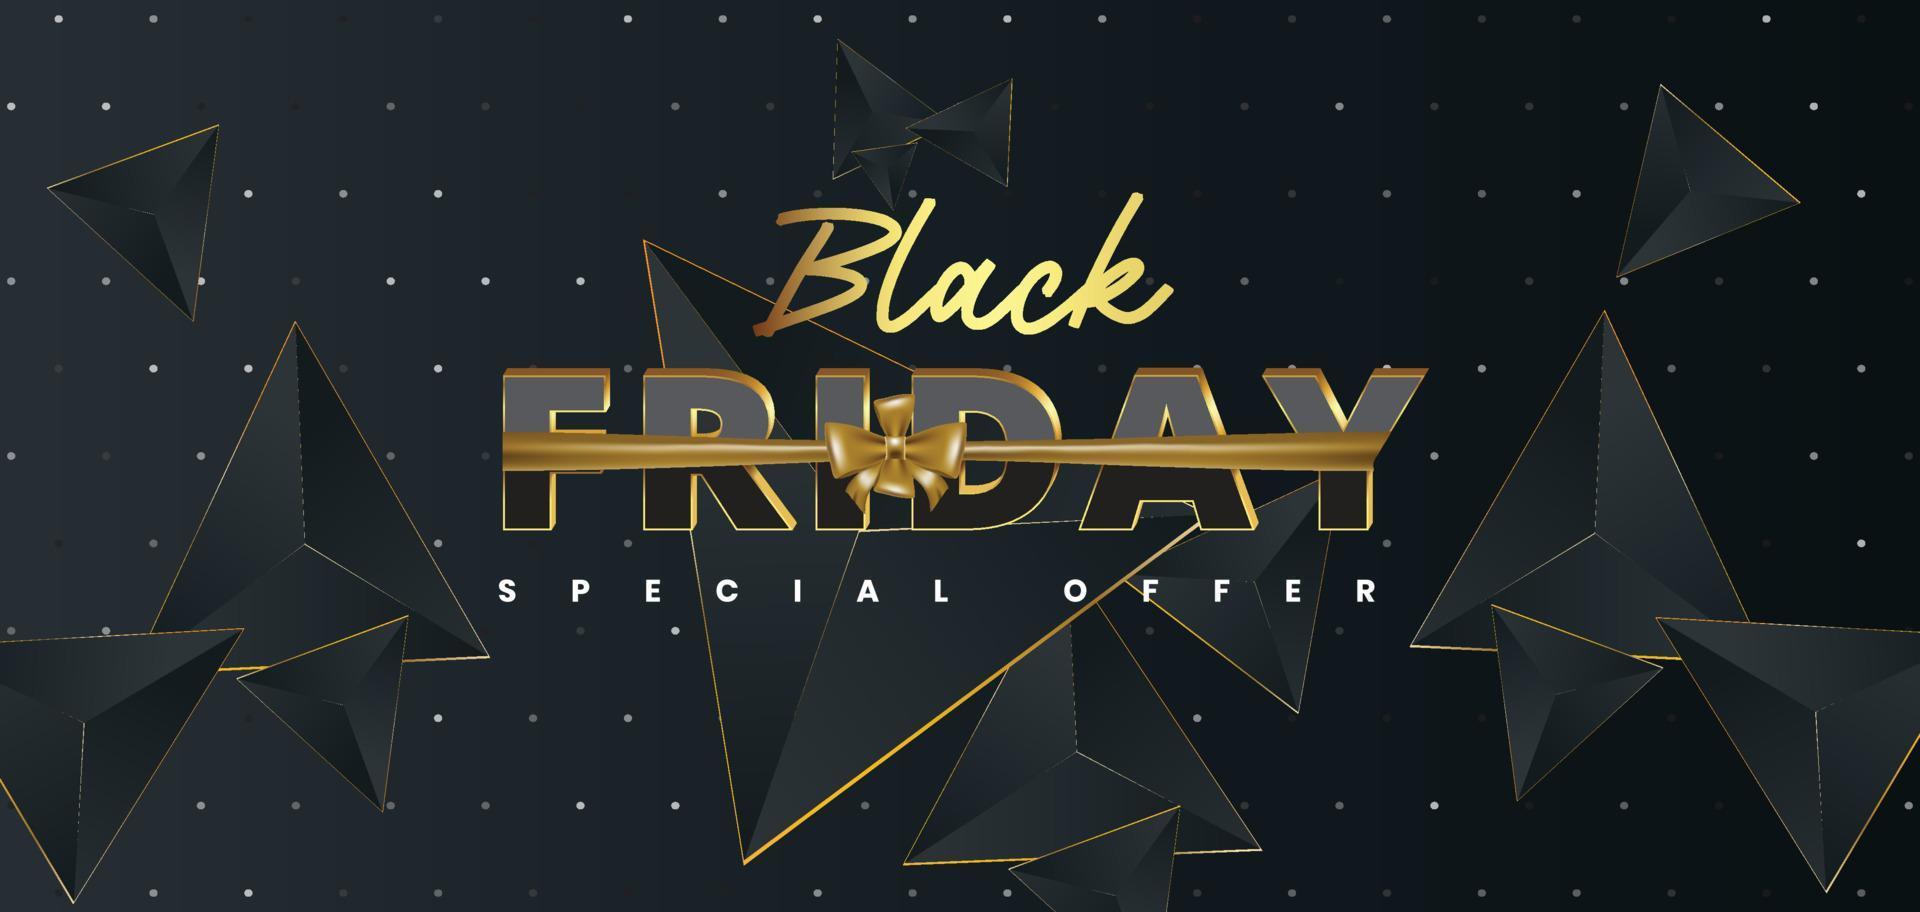 Black friday special offer banner with abstract background vector